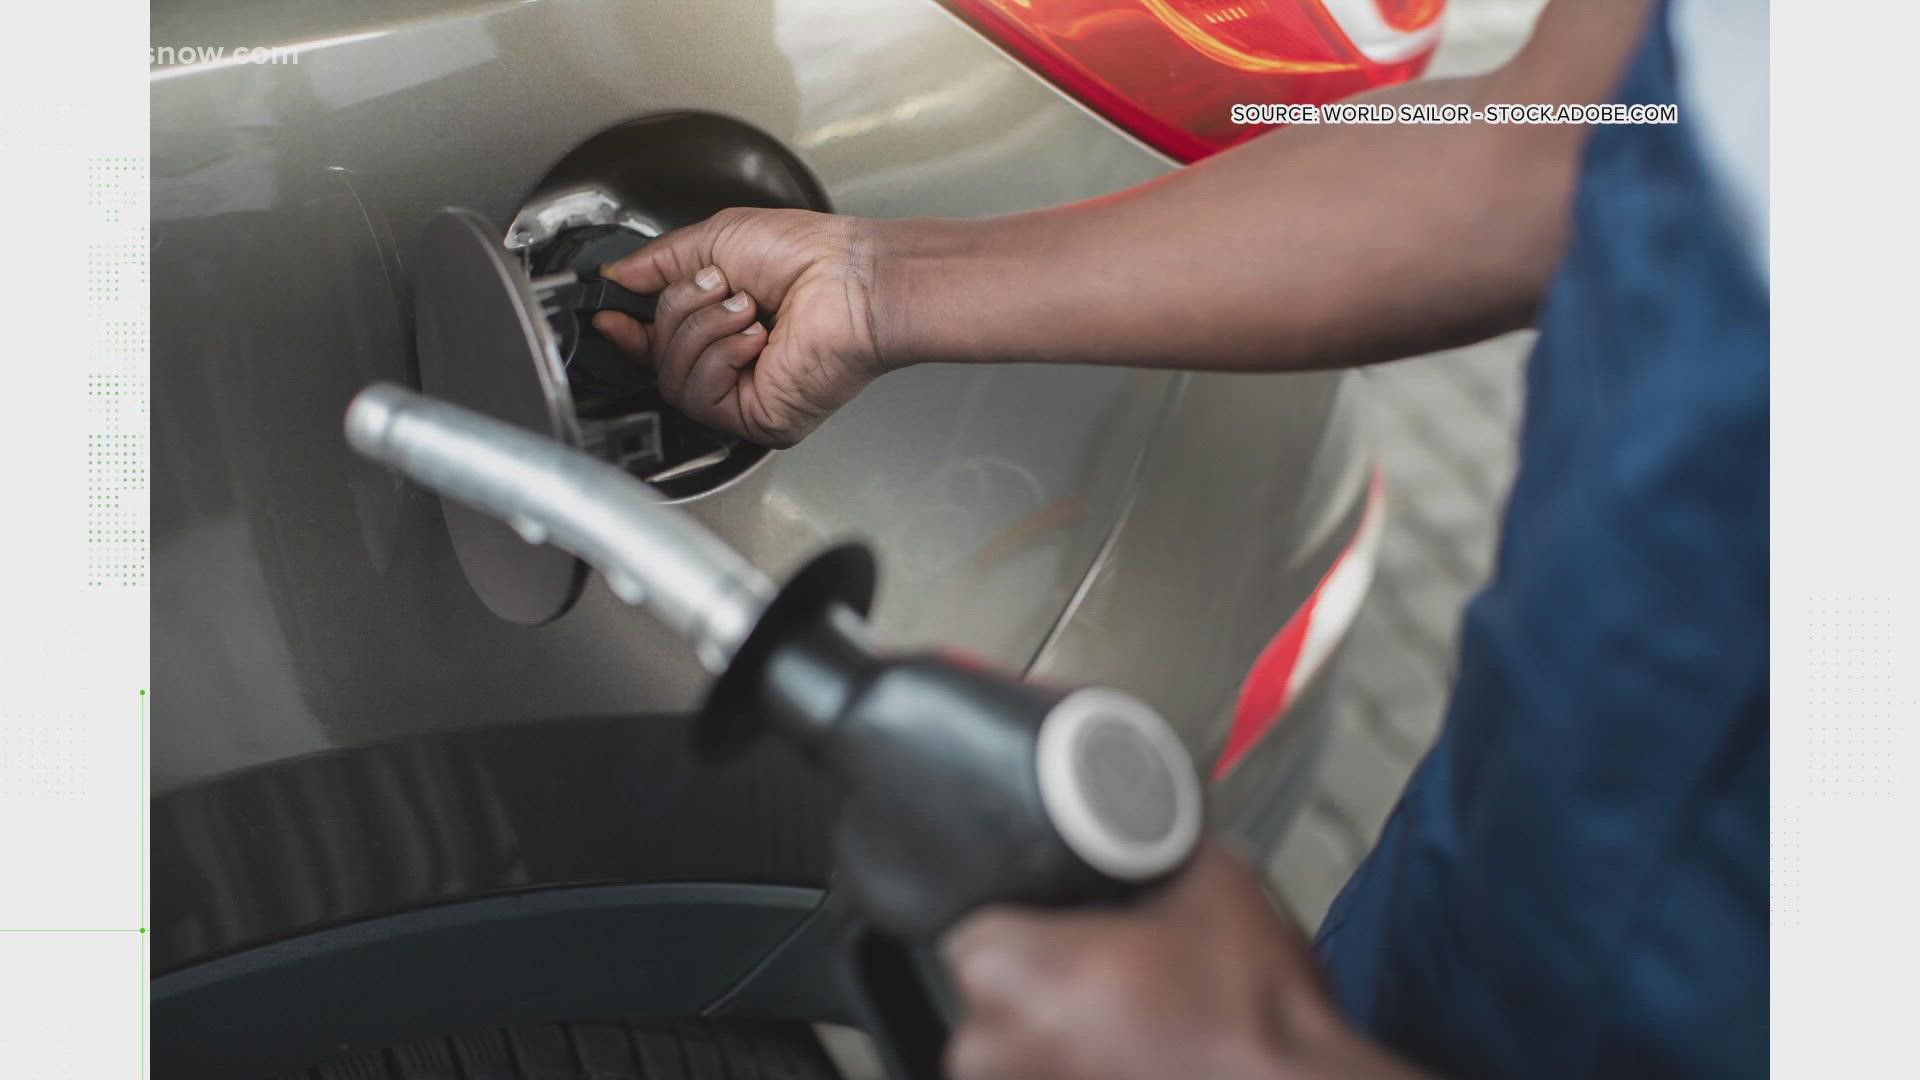 Consumer Reports concluded a 15-degree difference in air temperature between fill-ups caused only a one percent difference in gas volume.